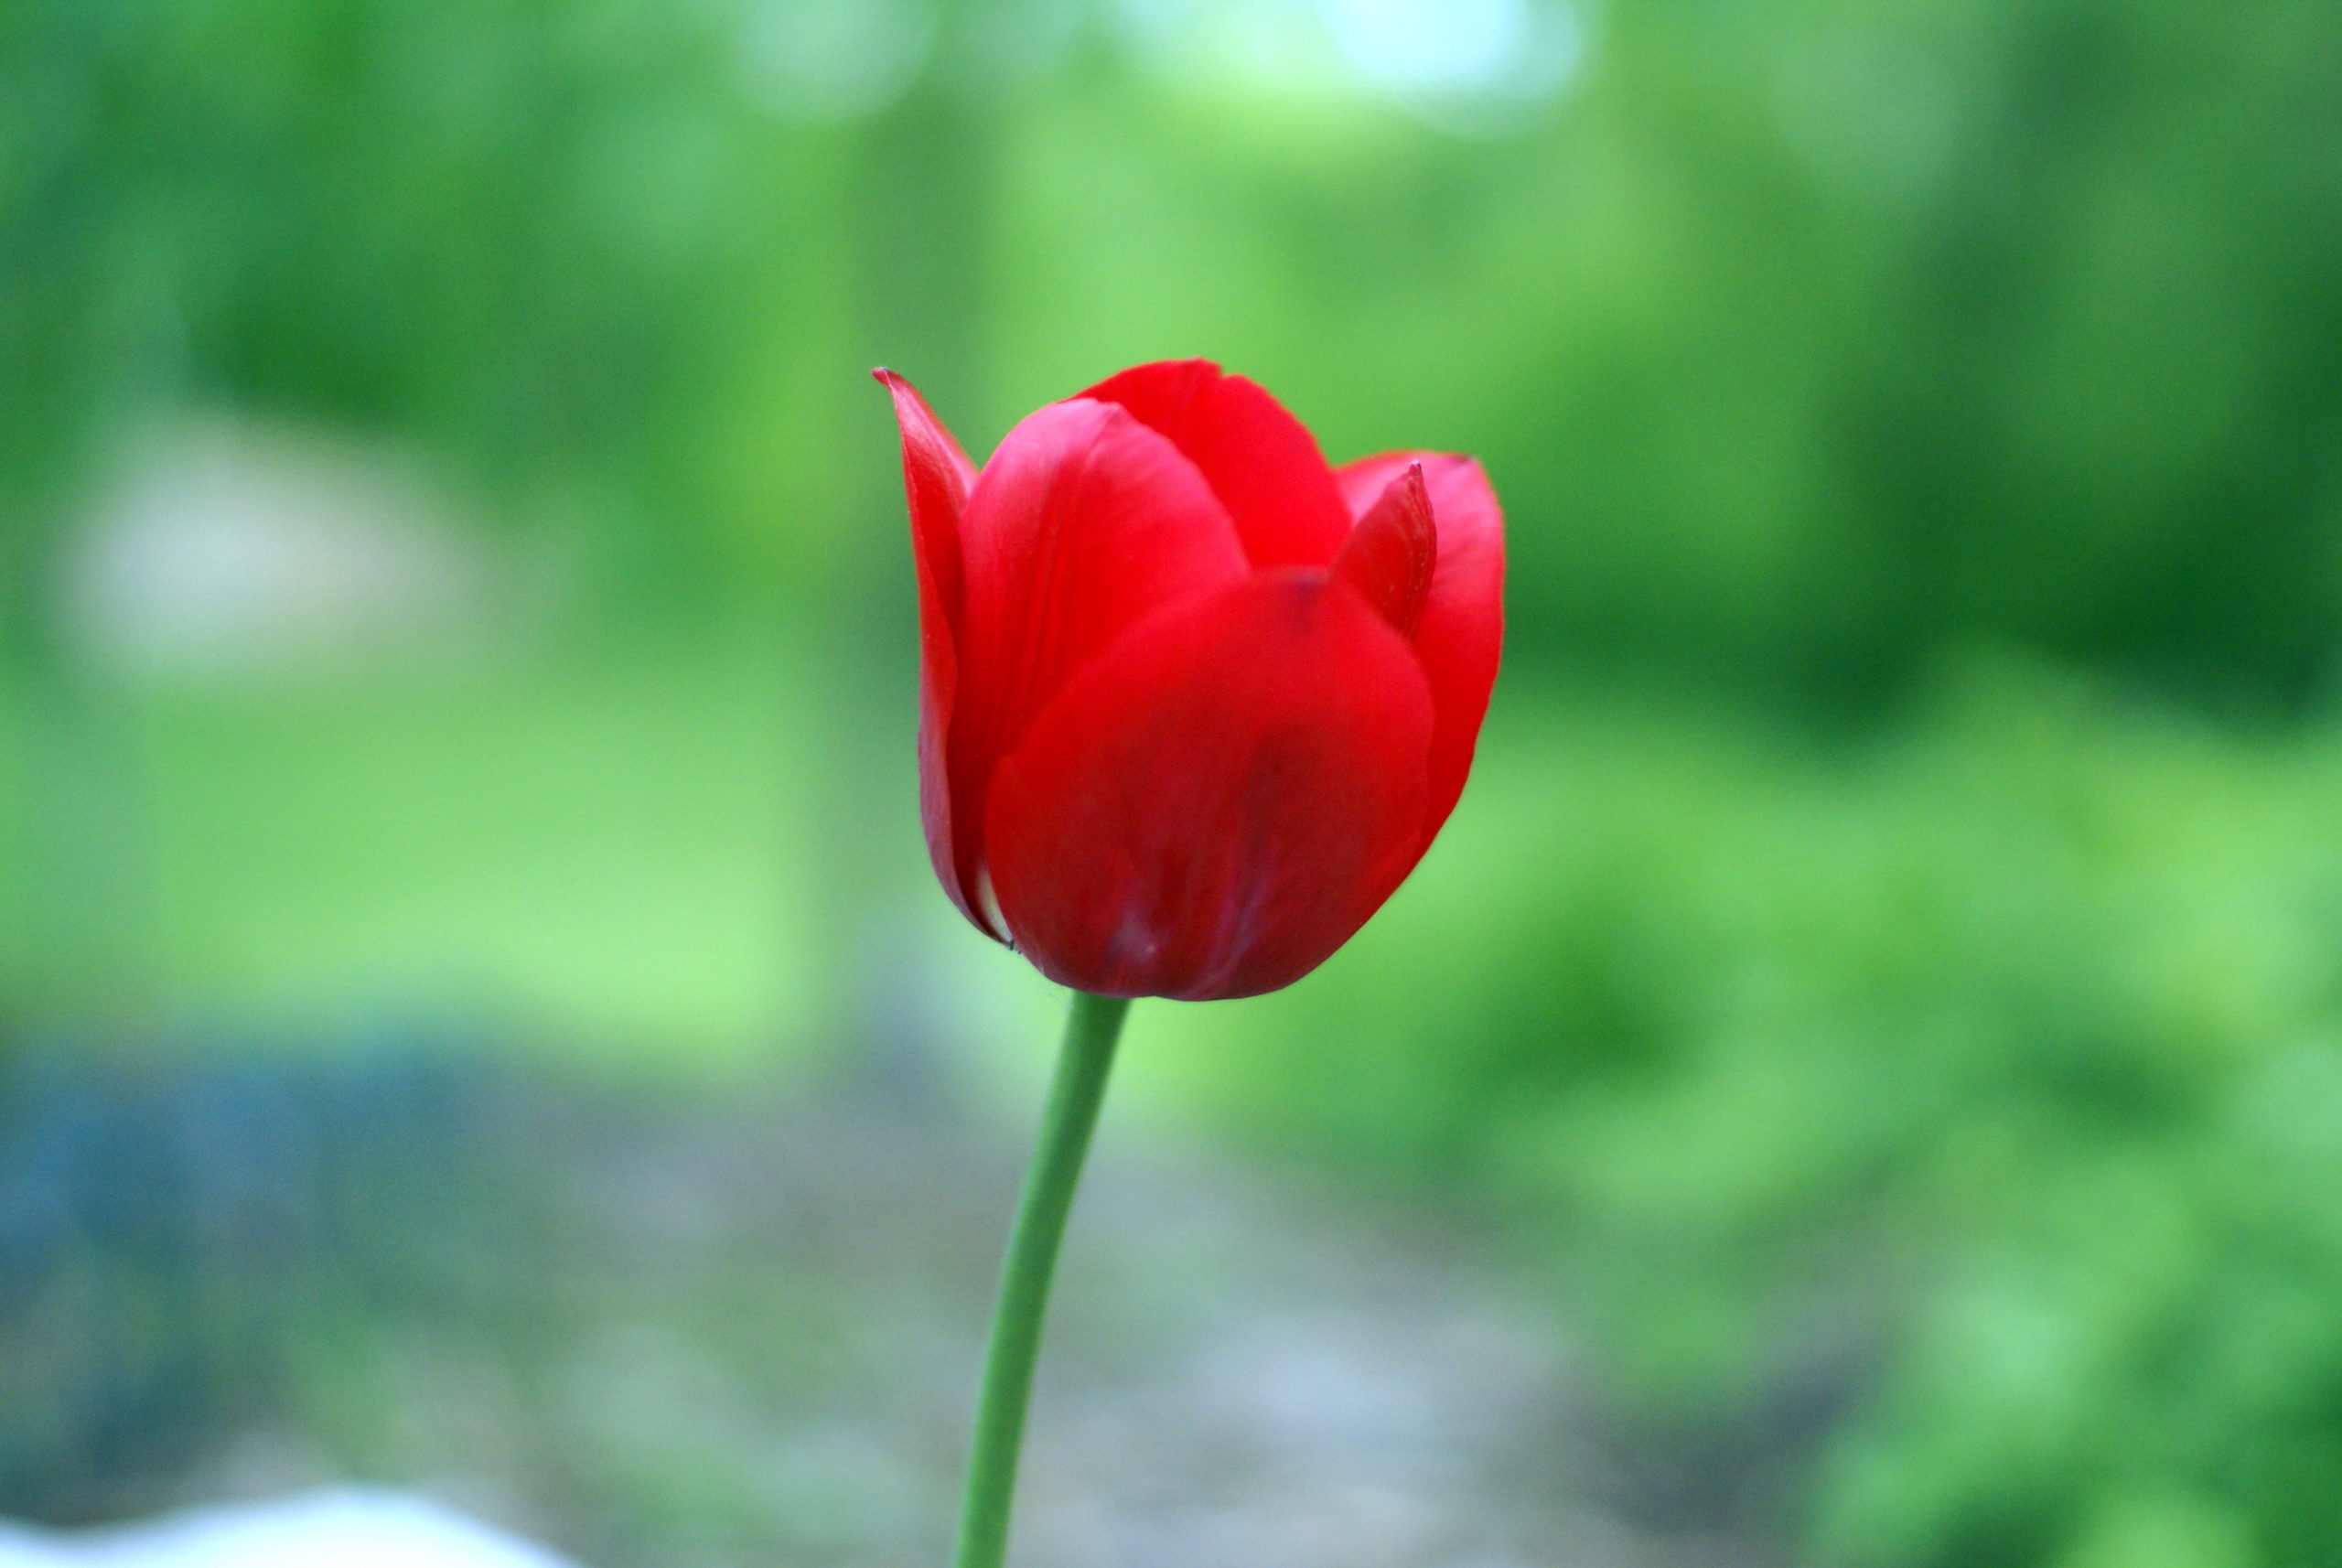 awesome red tulips images